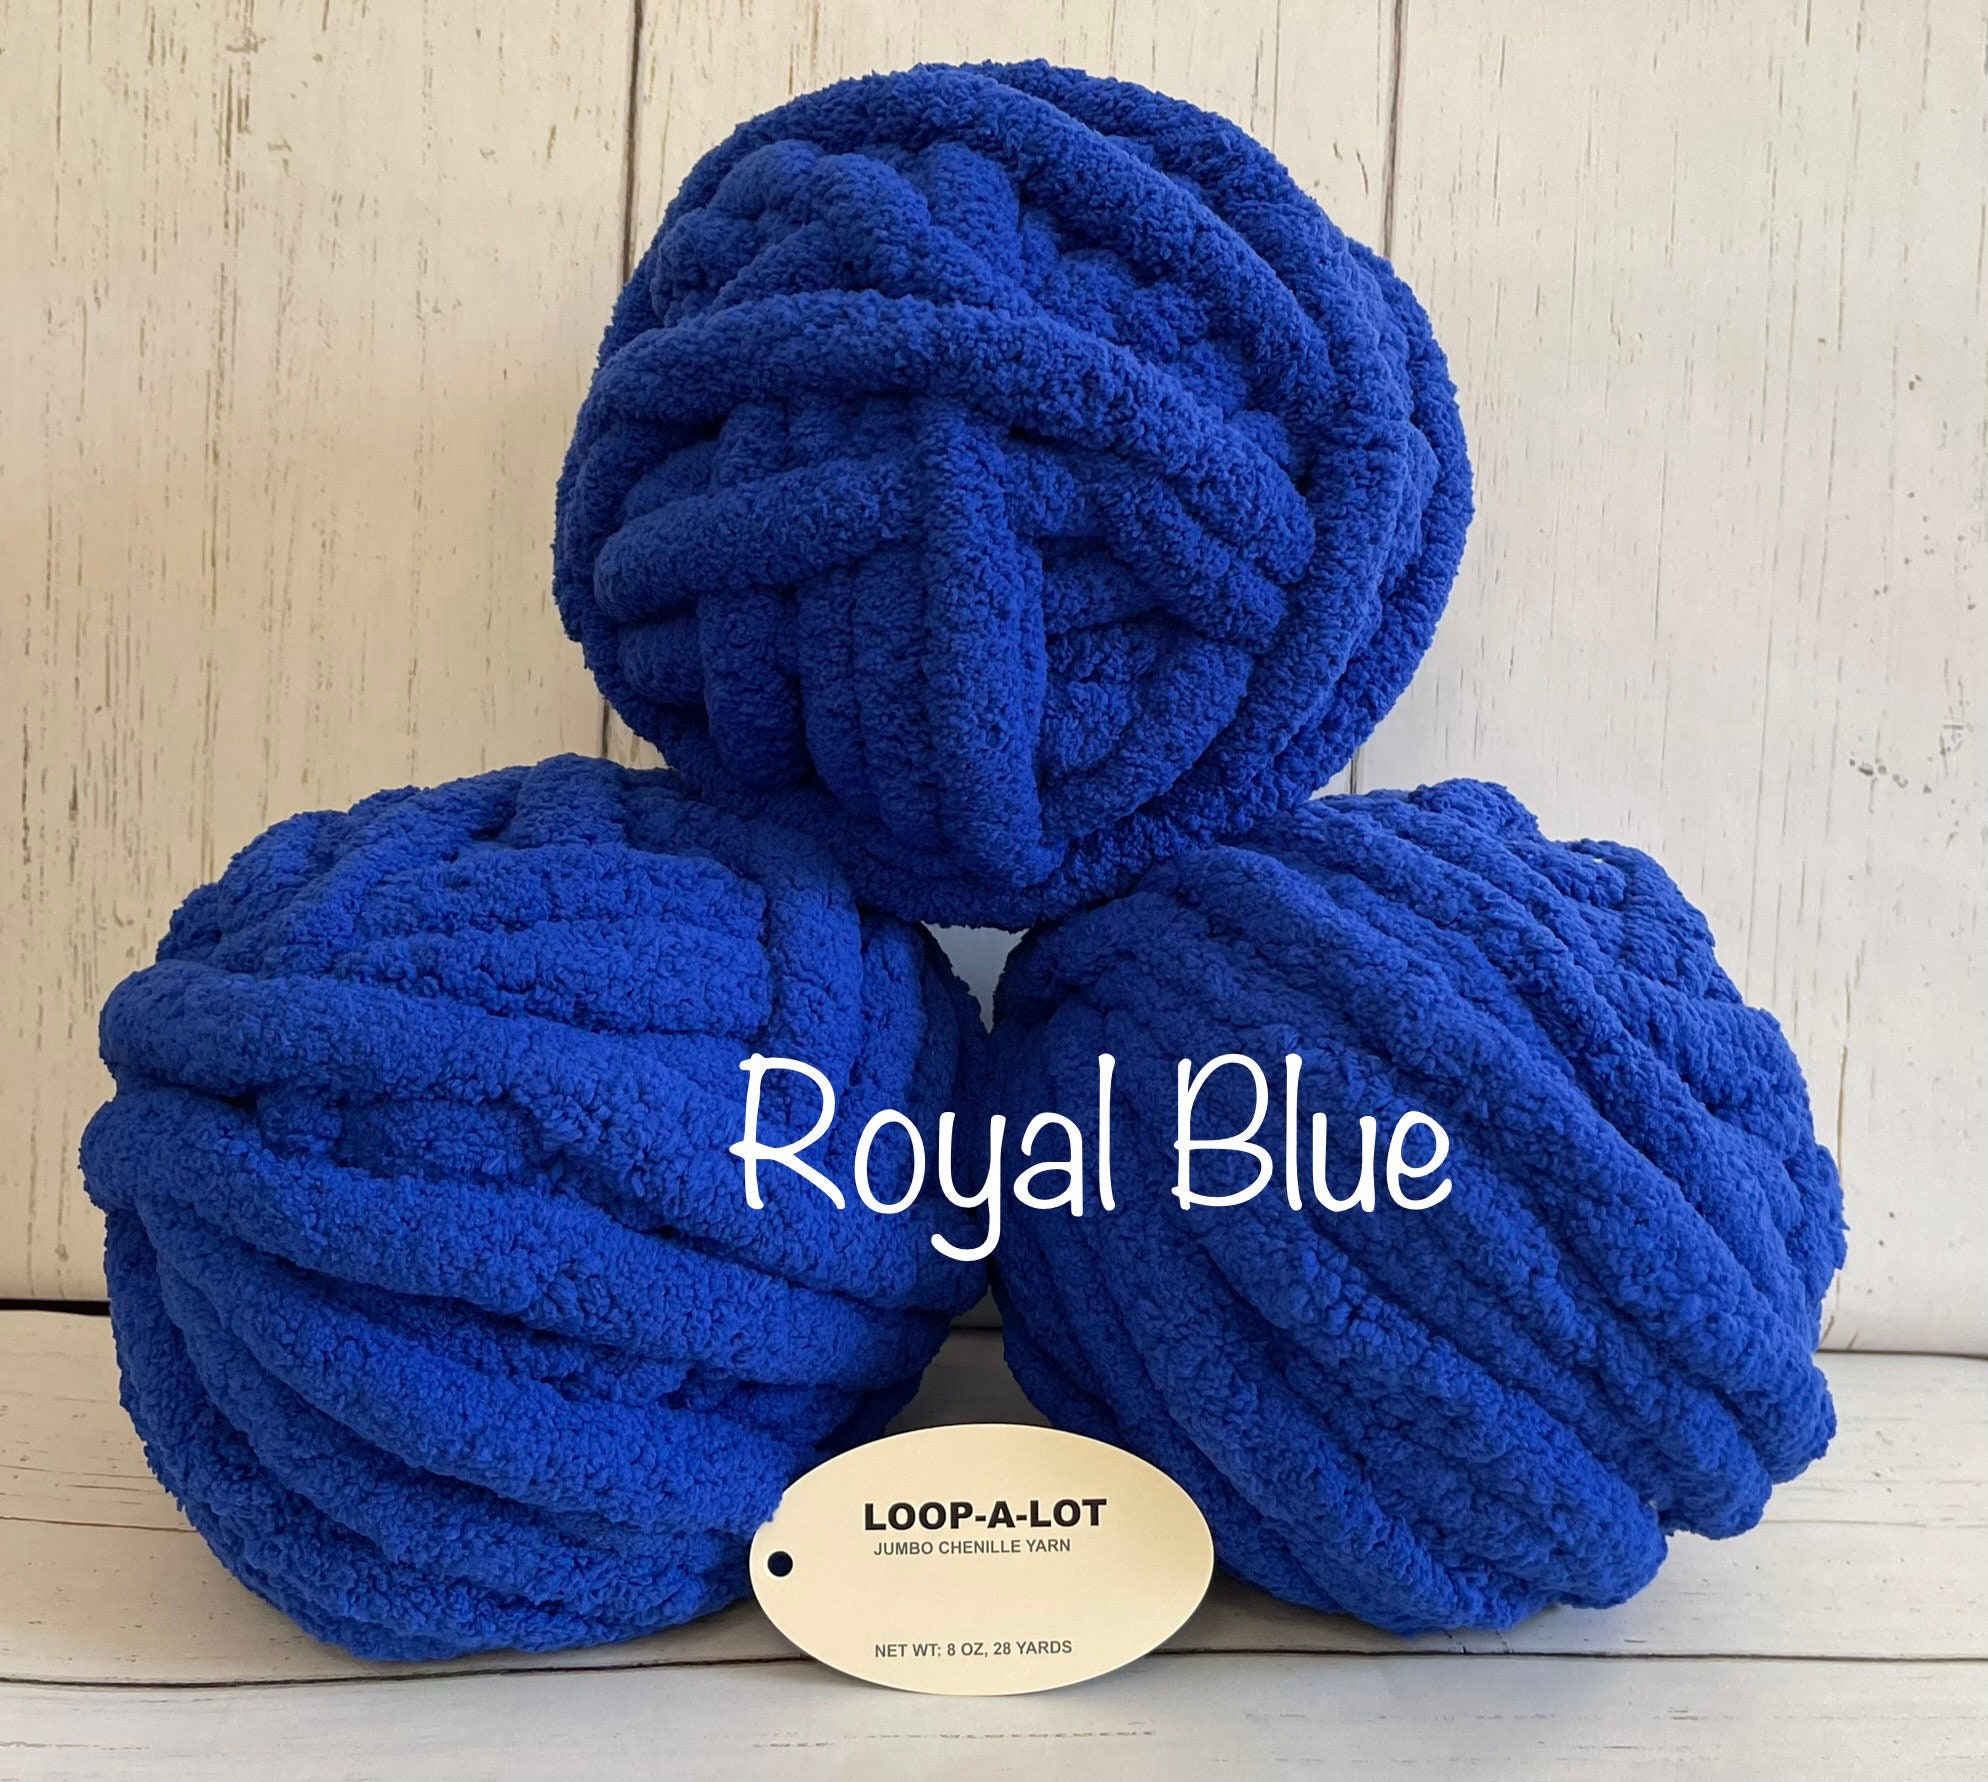 JUMBO Chenille Yarn, NEW COLOR Royal Blue Loop-a-lot 8oz/226.8g, 28y,  Polyester, Super Bulky 7 low Shipping Rates -  Singapore